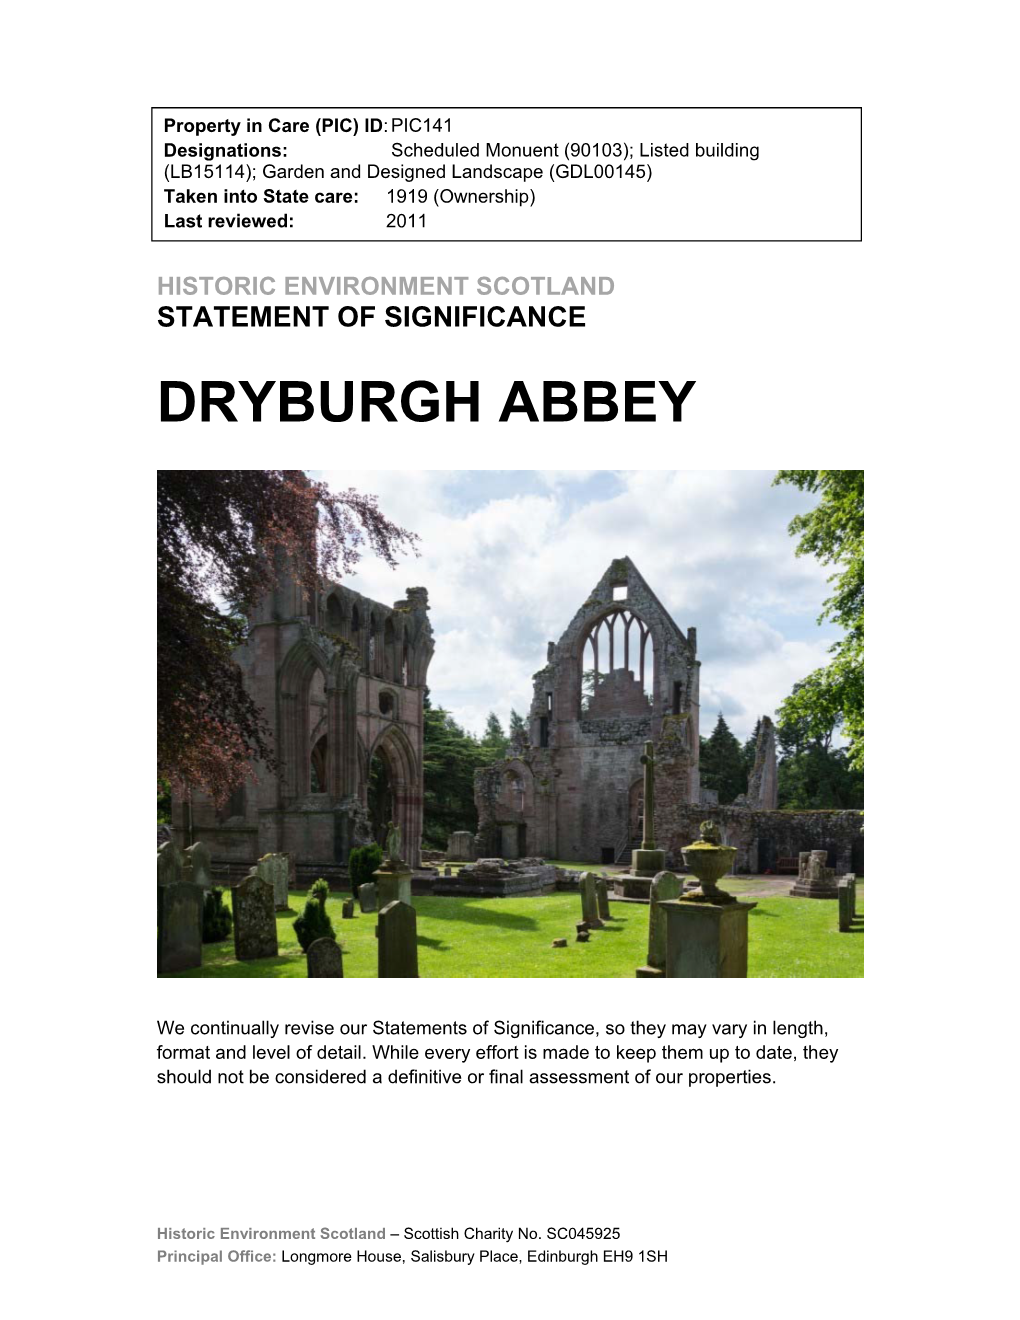 Dryburgh Abbey Statement of Significance